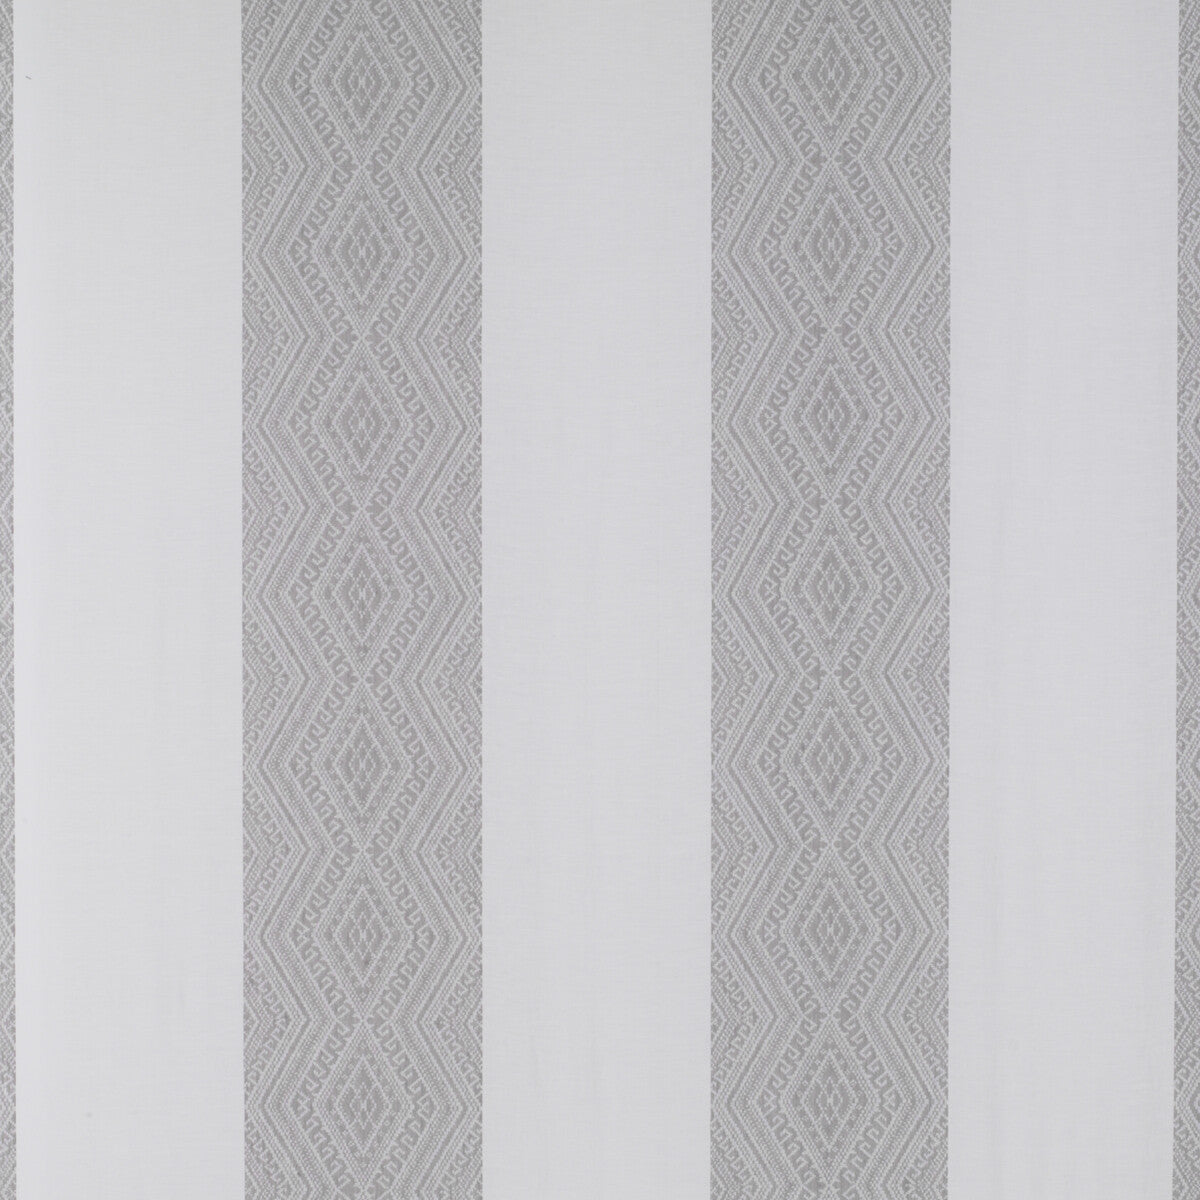 Pianosa fabric in piedra color - pattern GDT5312.003.0 - by Gaston y Daniela in the Tierras collection